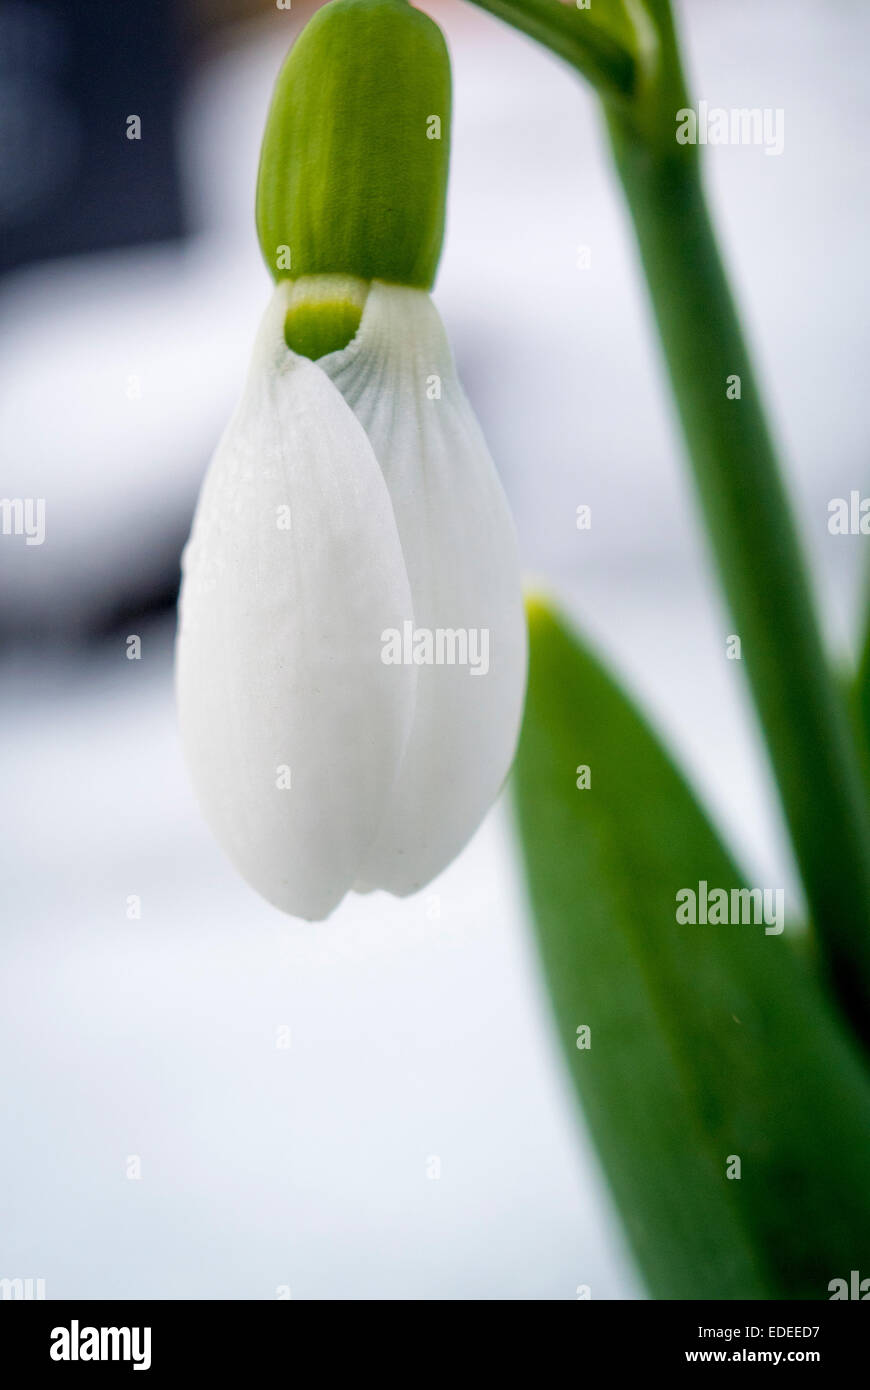 White snowdrop flower close up in snow Stock Photo